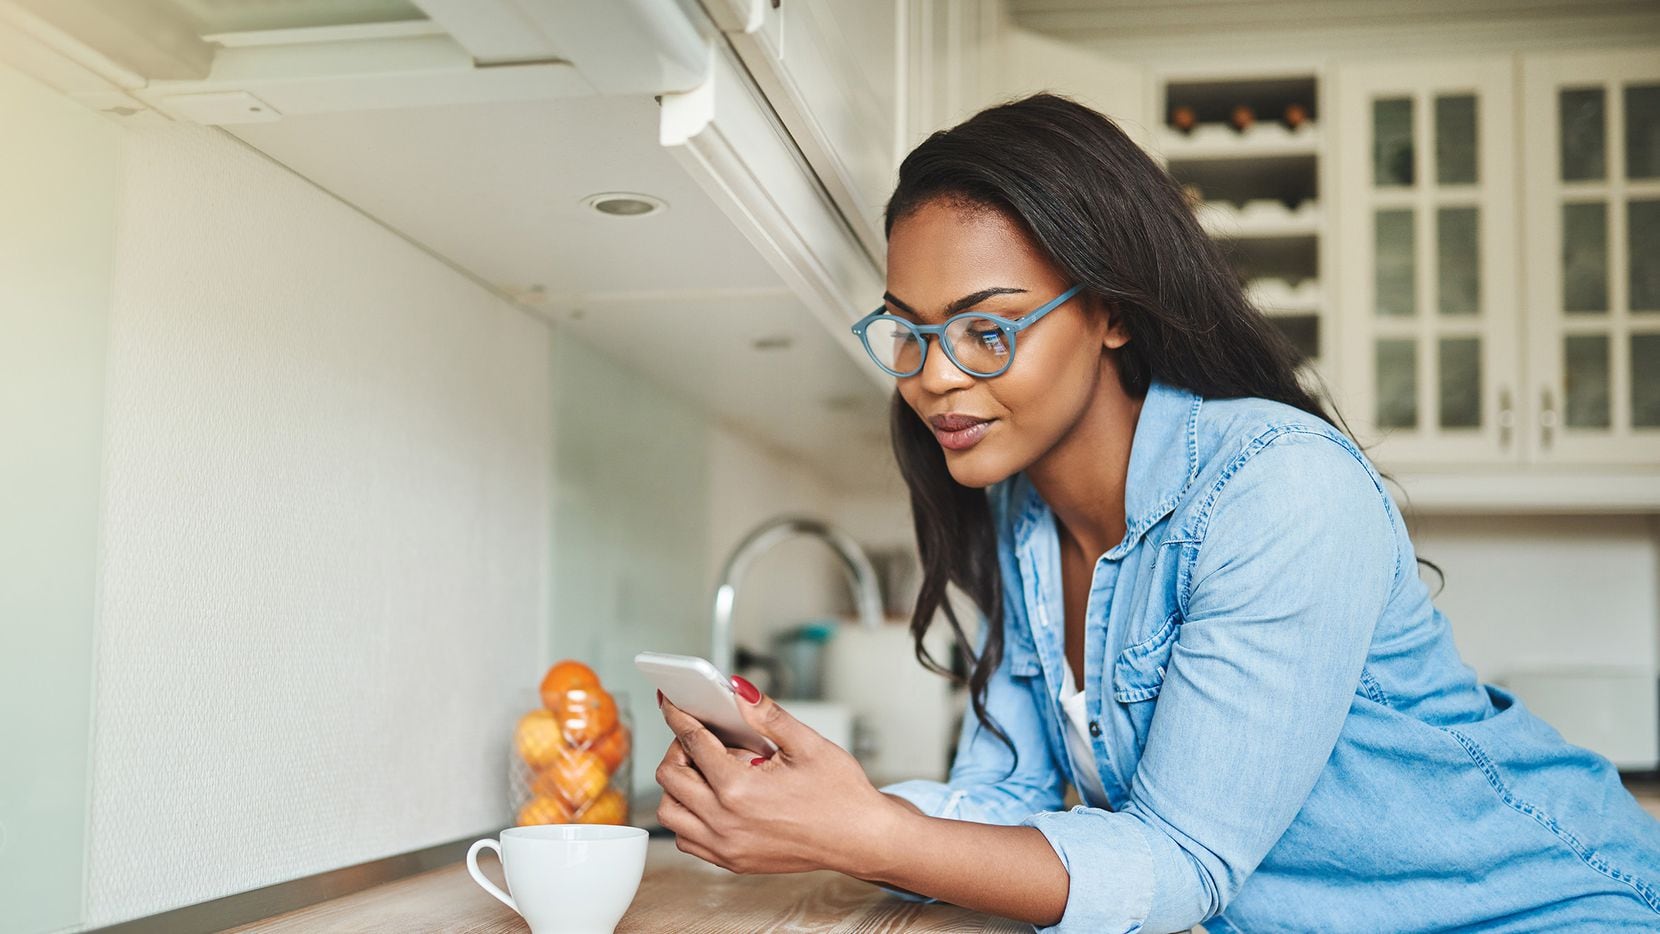 “Millennials are about 3.5 times as likely as older adults to feel pressure to overspend due to social media,” shared Ted Rossman, Bankrate.com spokesperson.